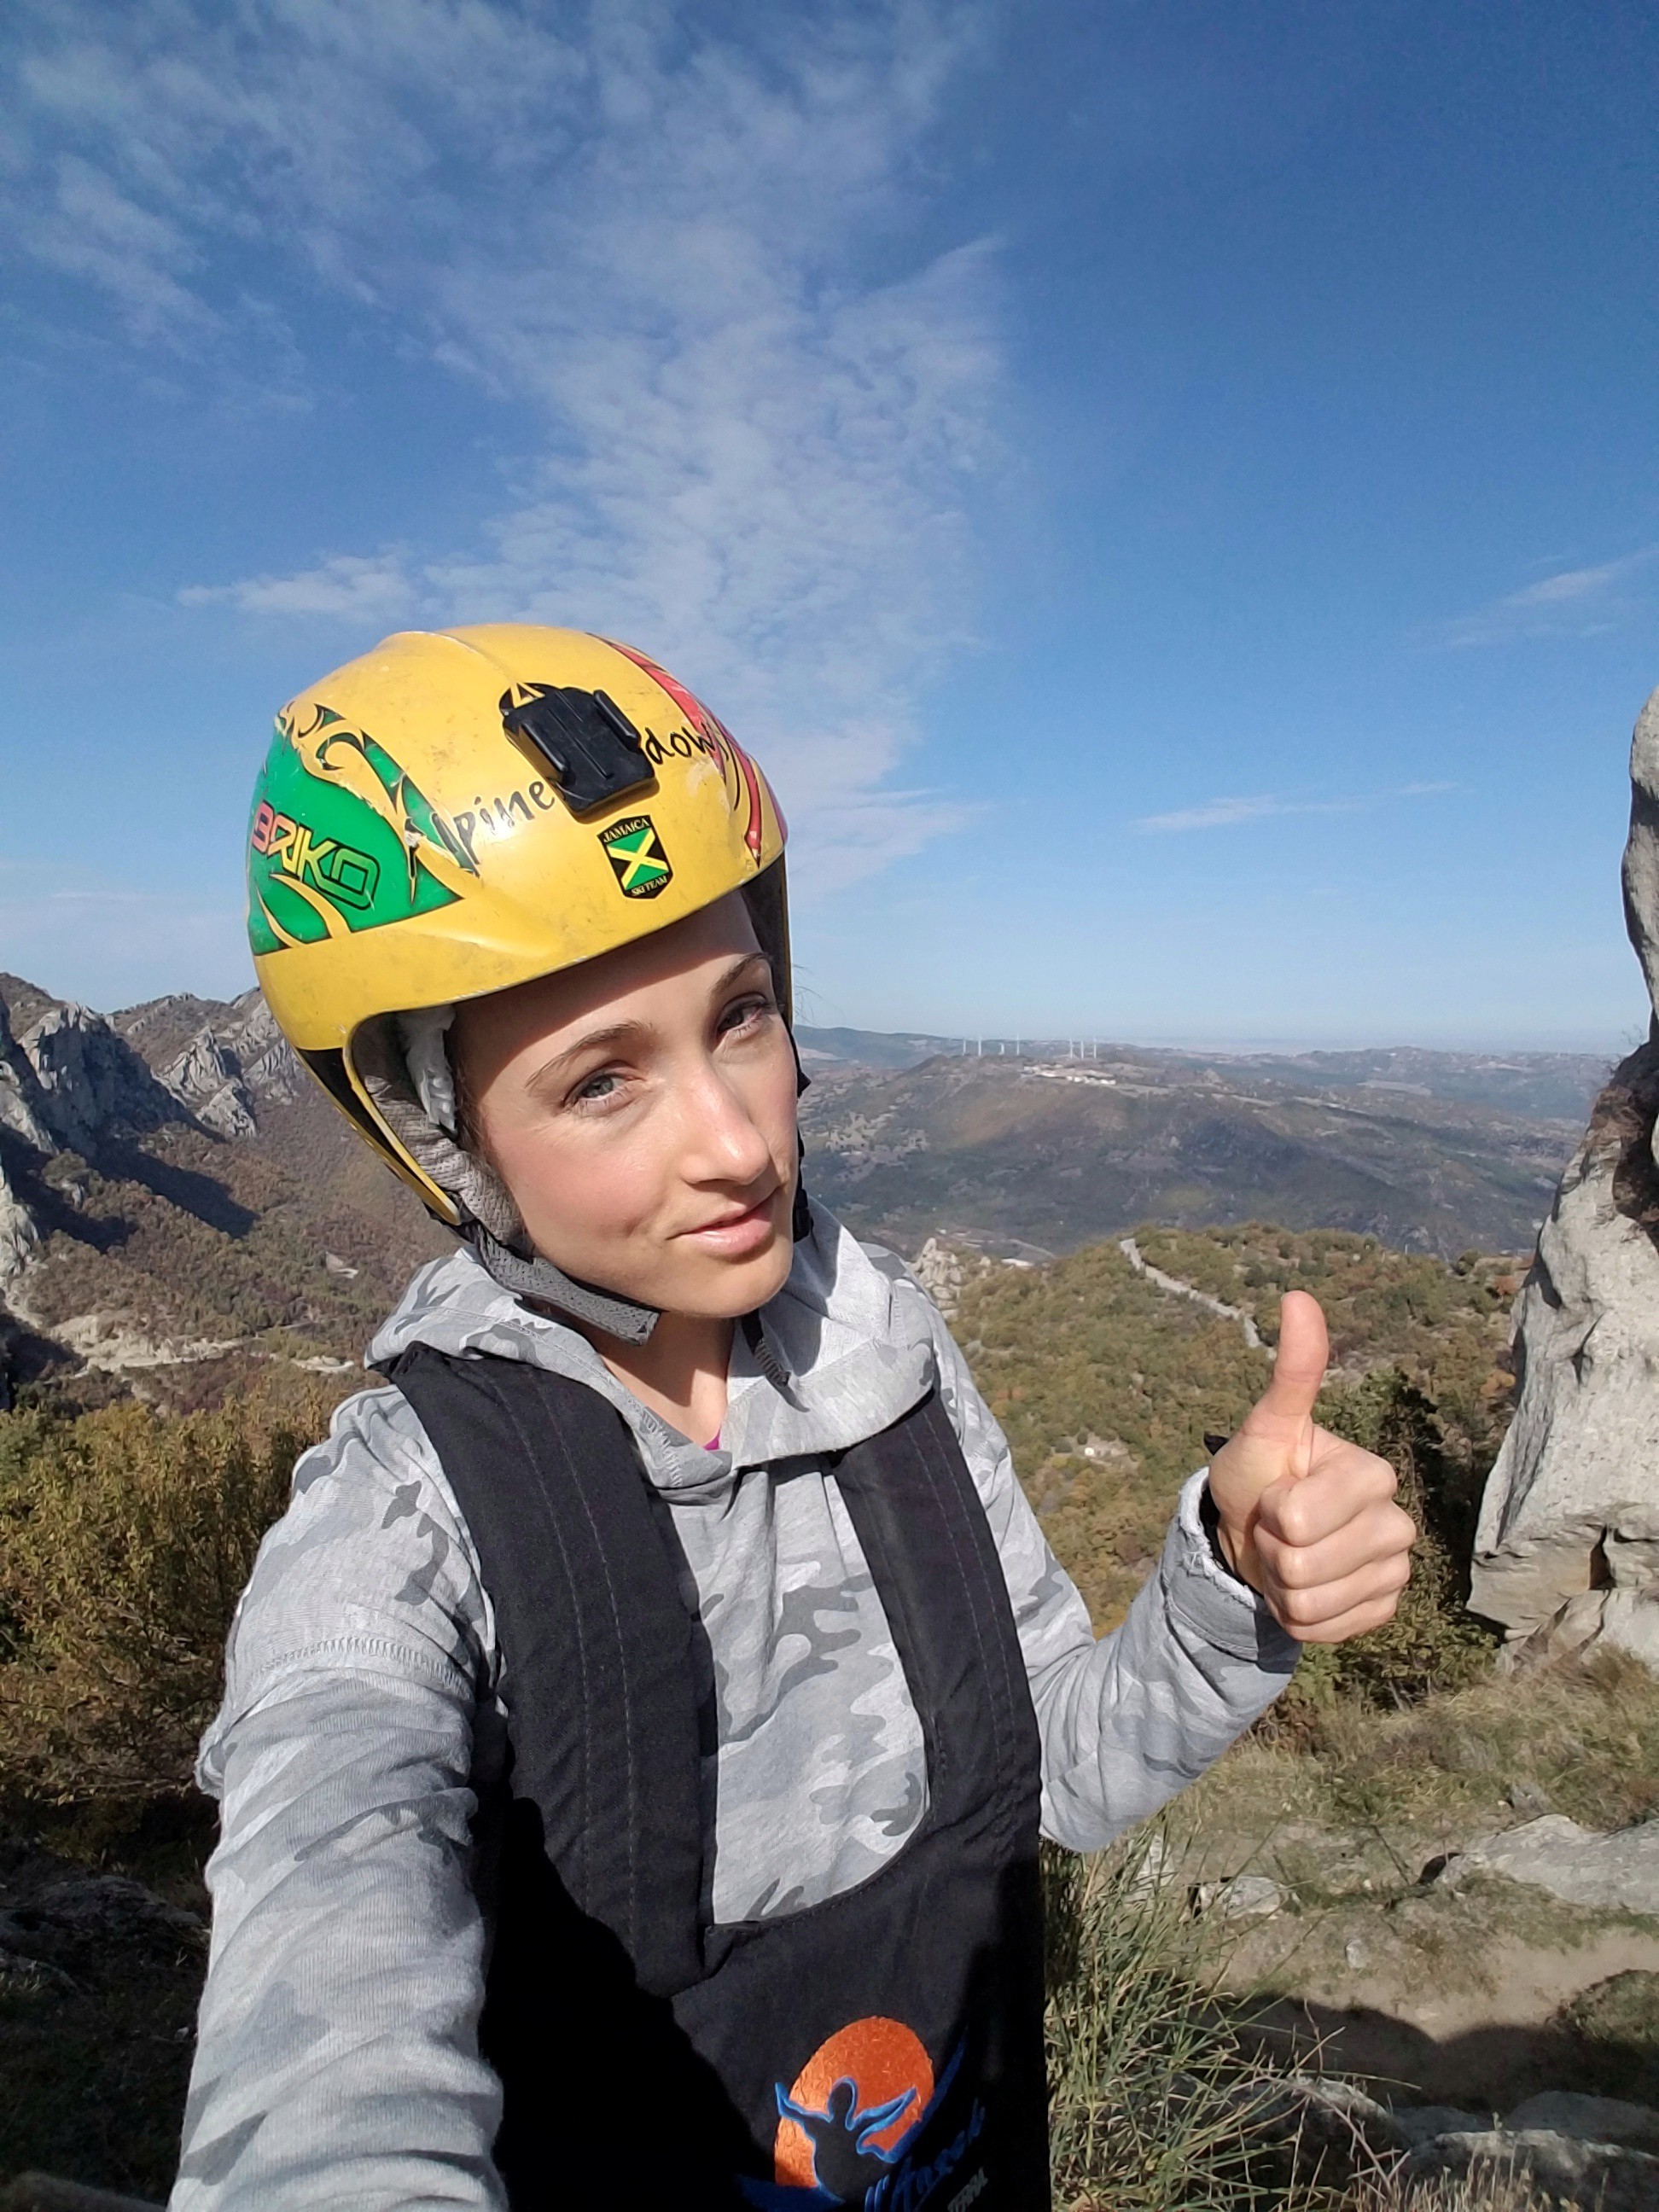 Woman with a helmet and harness standing in front of a valley